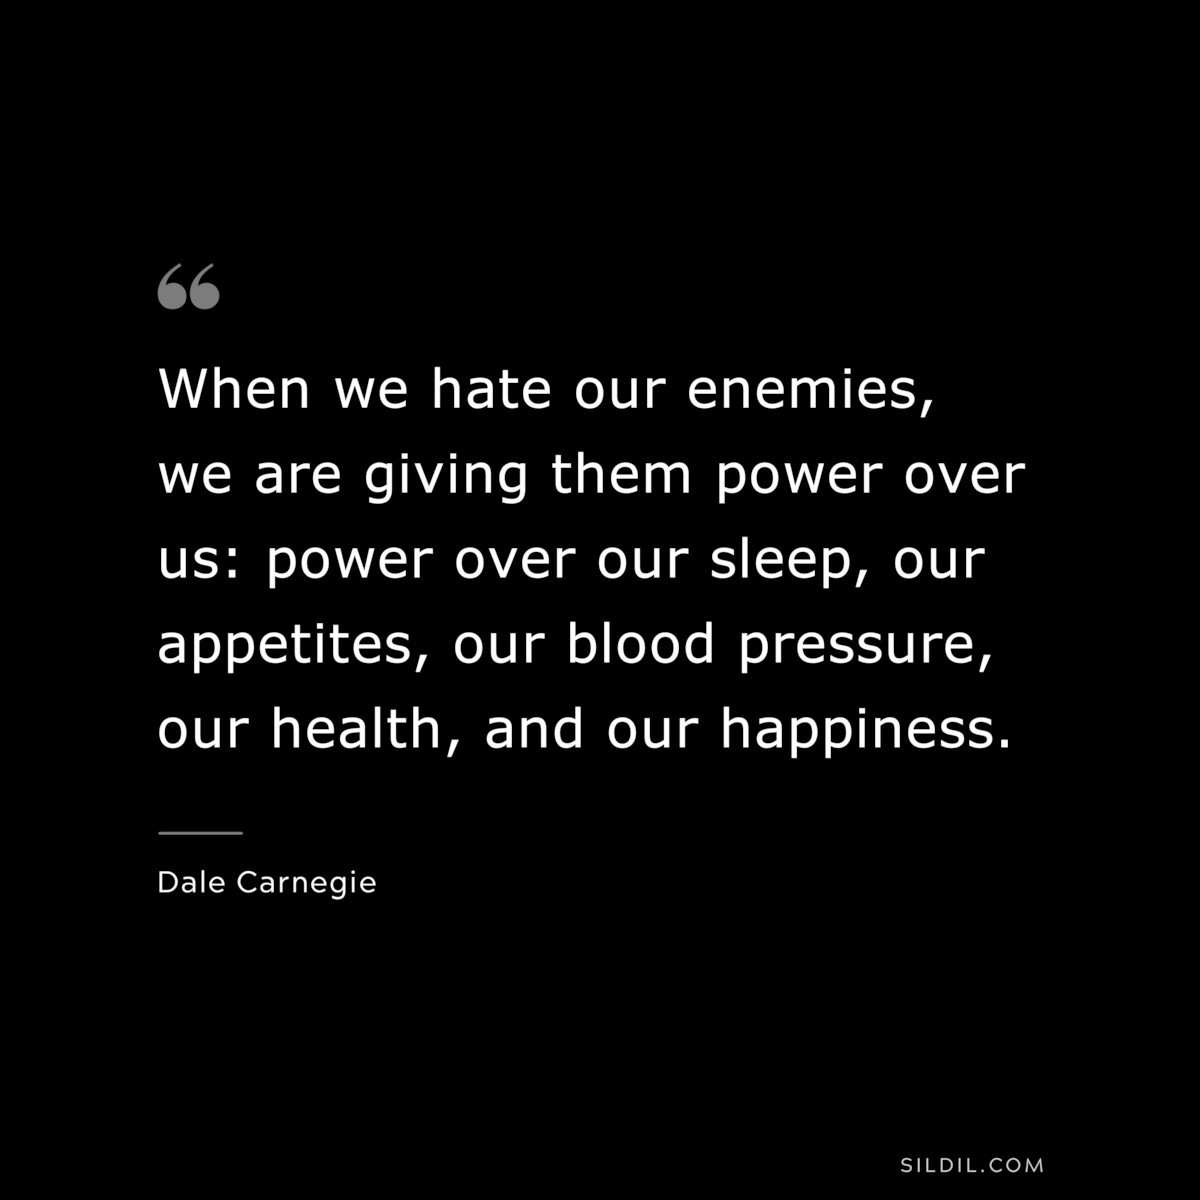 When we hate our enemies, we are giving them power over us: power over our sleep, our appetites, our blood pressure, our health, and our happiness.― Dale Carnegie